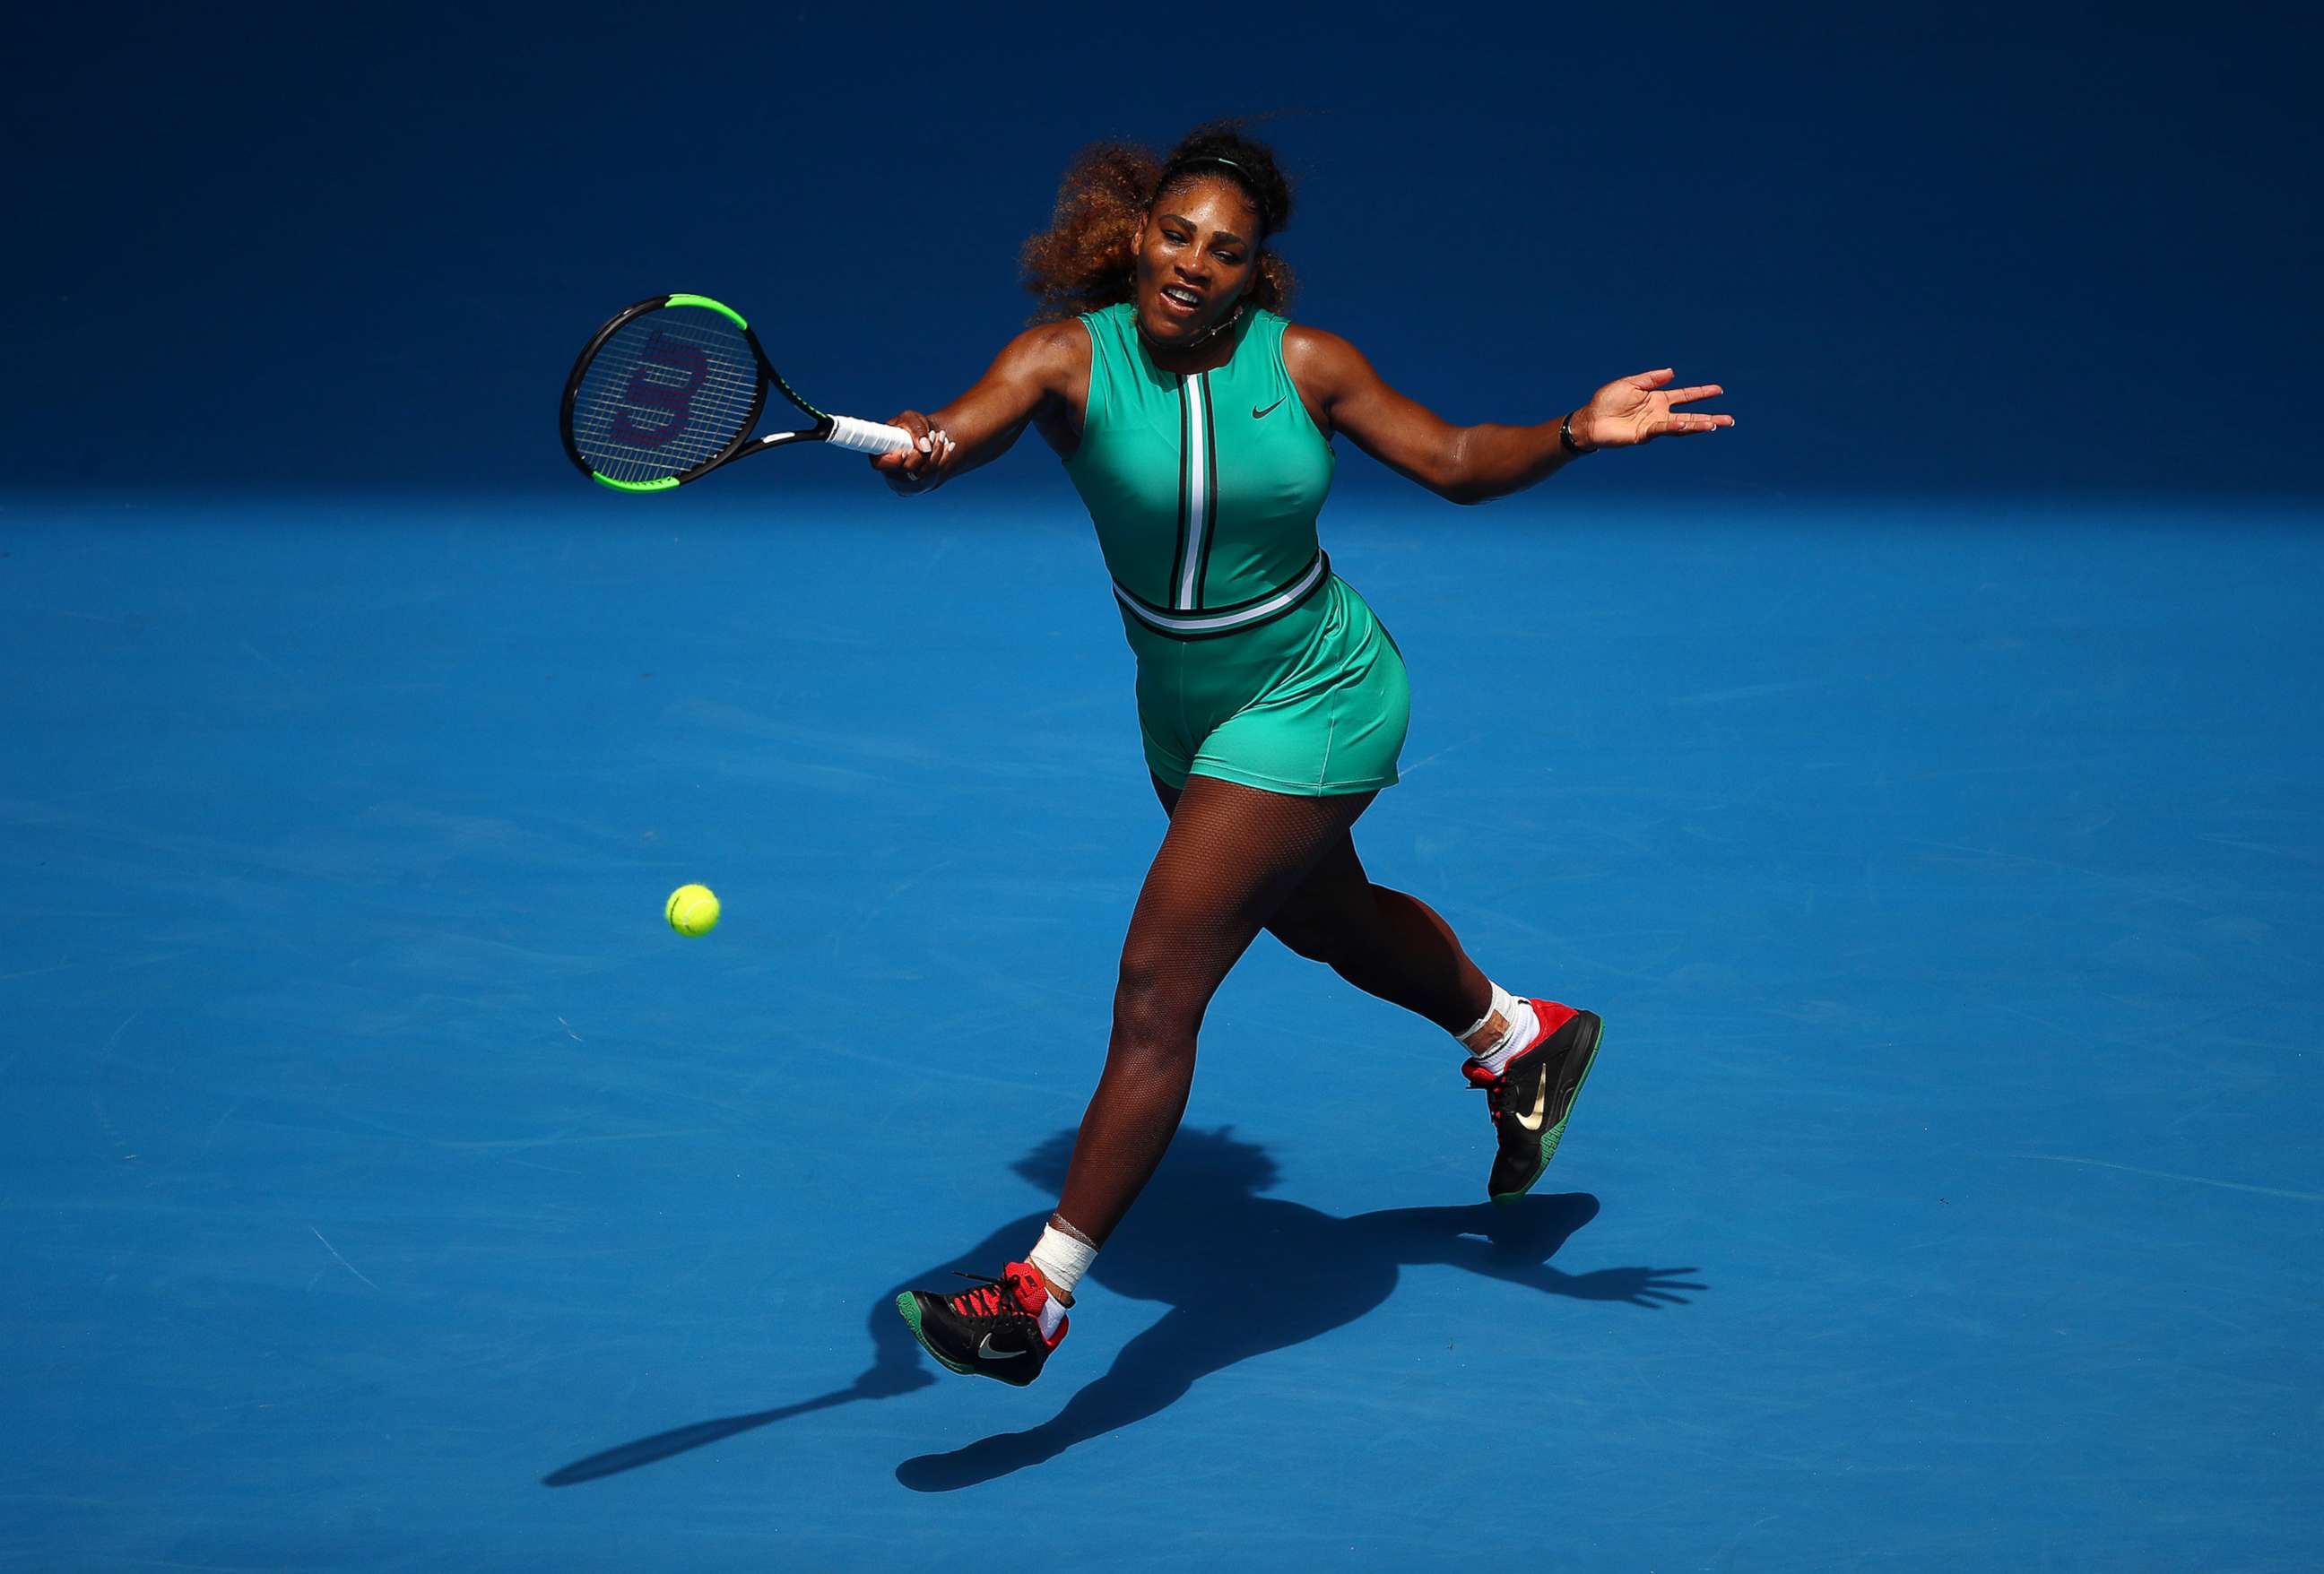 PHOTO: Serena Williams of the U.S. plays during the 2019 Australian Open at Melbourne Park, Jan. 15, 2019 in Melbourne, Australia.